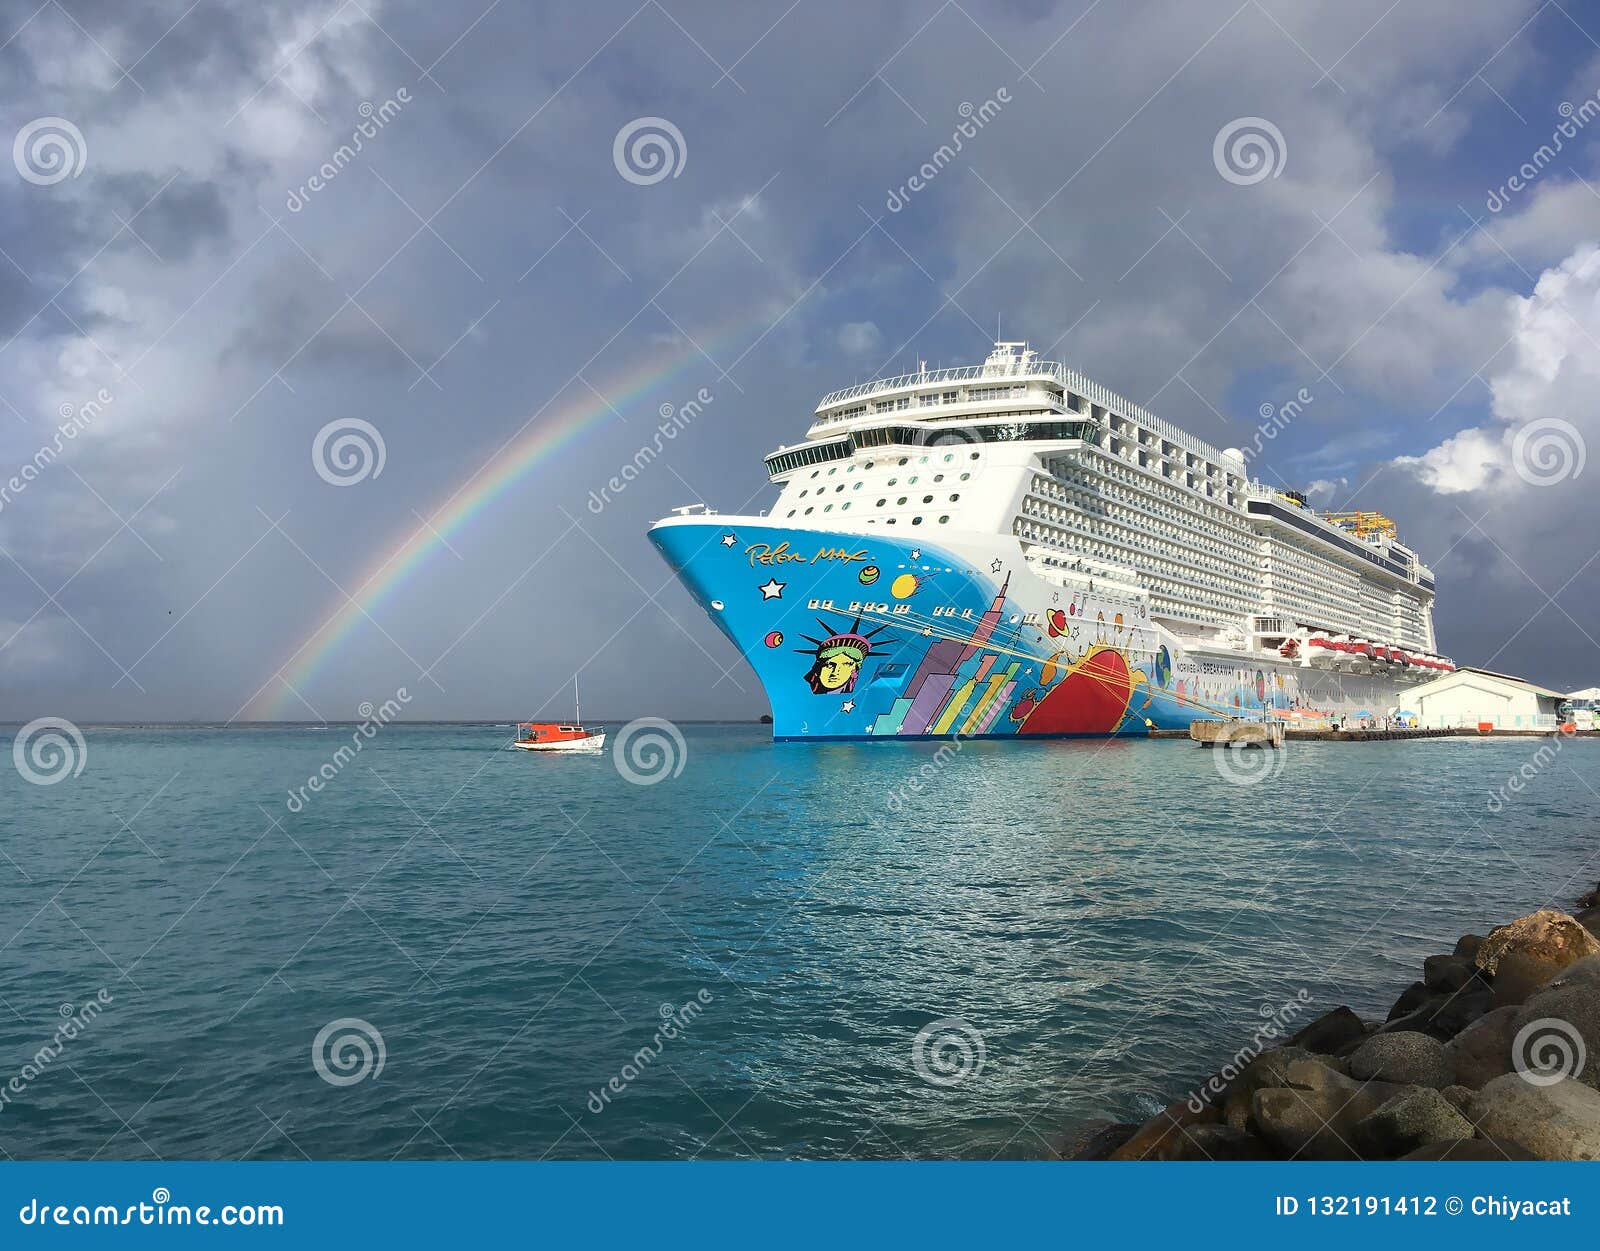 A Colorful Cruise Ship Called Norwegian Breakaway Ncl Docked At Oranjestad Harbor 3 Editorial 